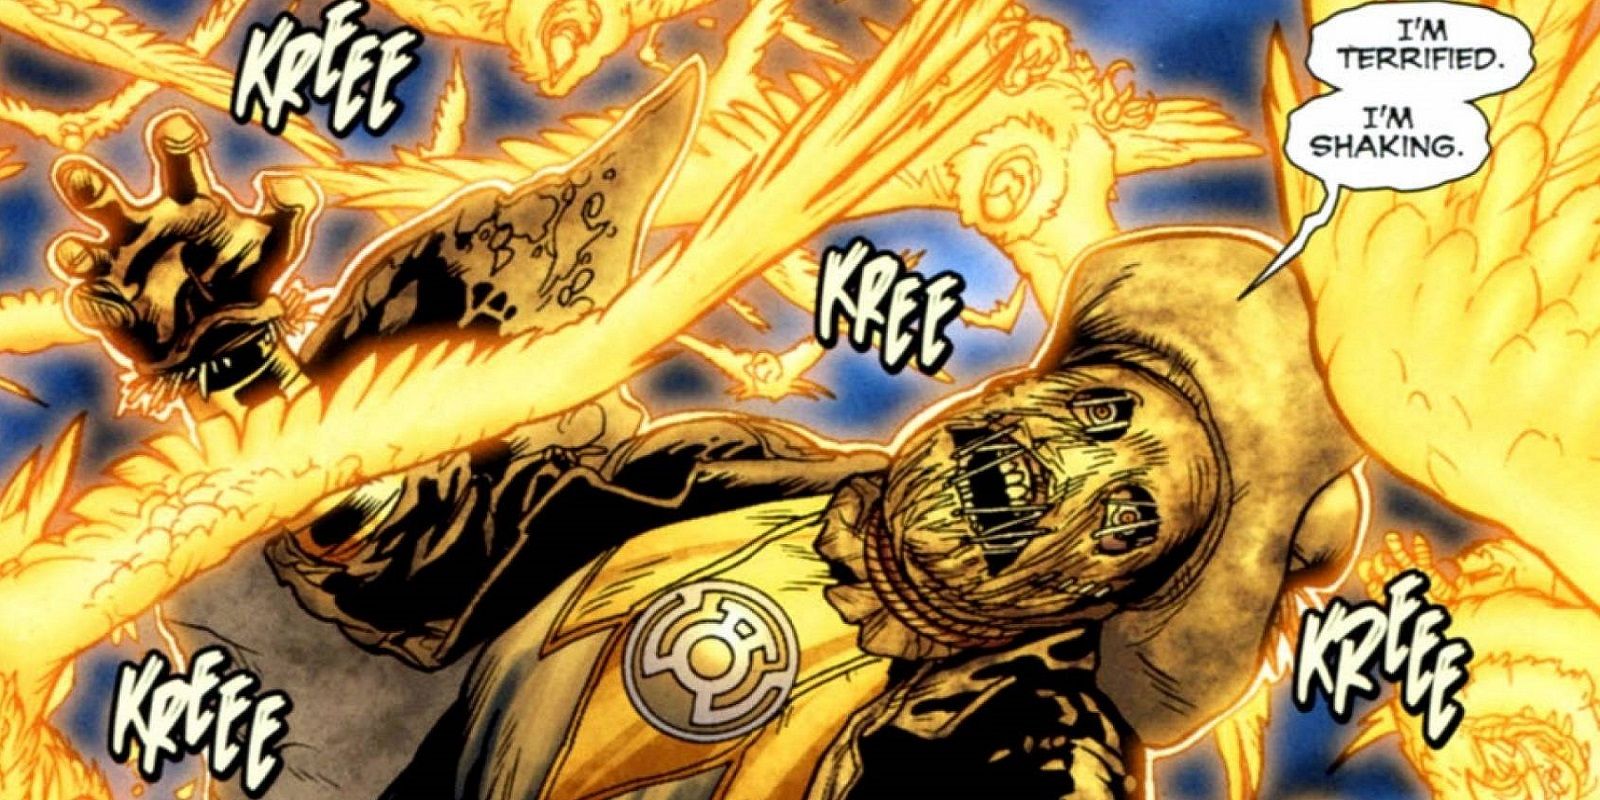 Scarecrow conjuring creatures with the Sinestro corps ring